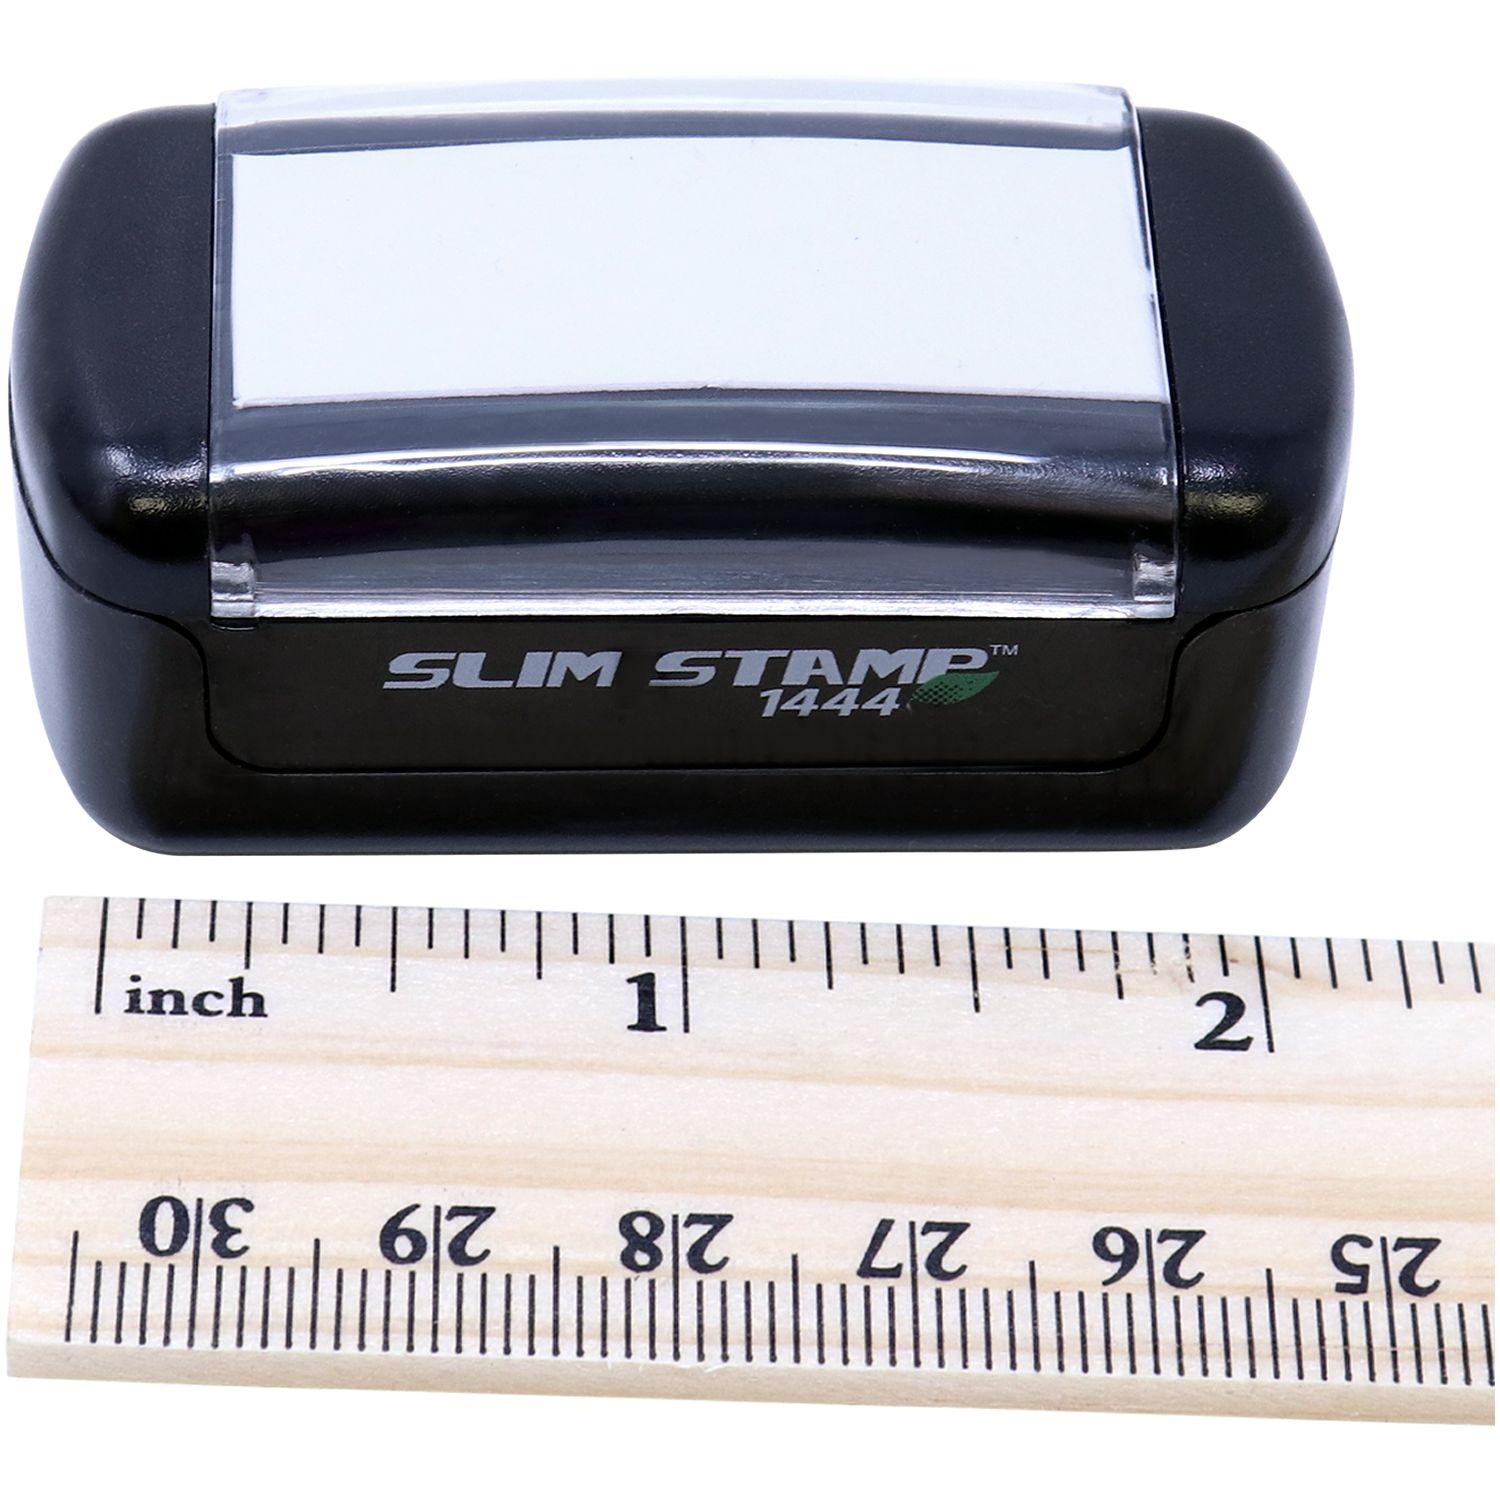 Measurement Slim Pre-Inked Narrow Font Return Receipt Requested Stamp with Ruler